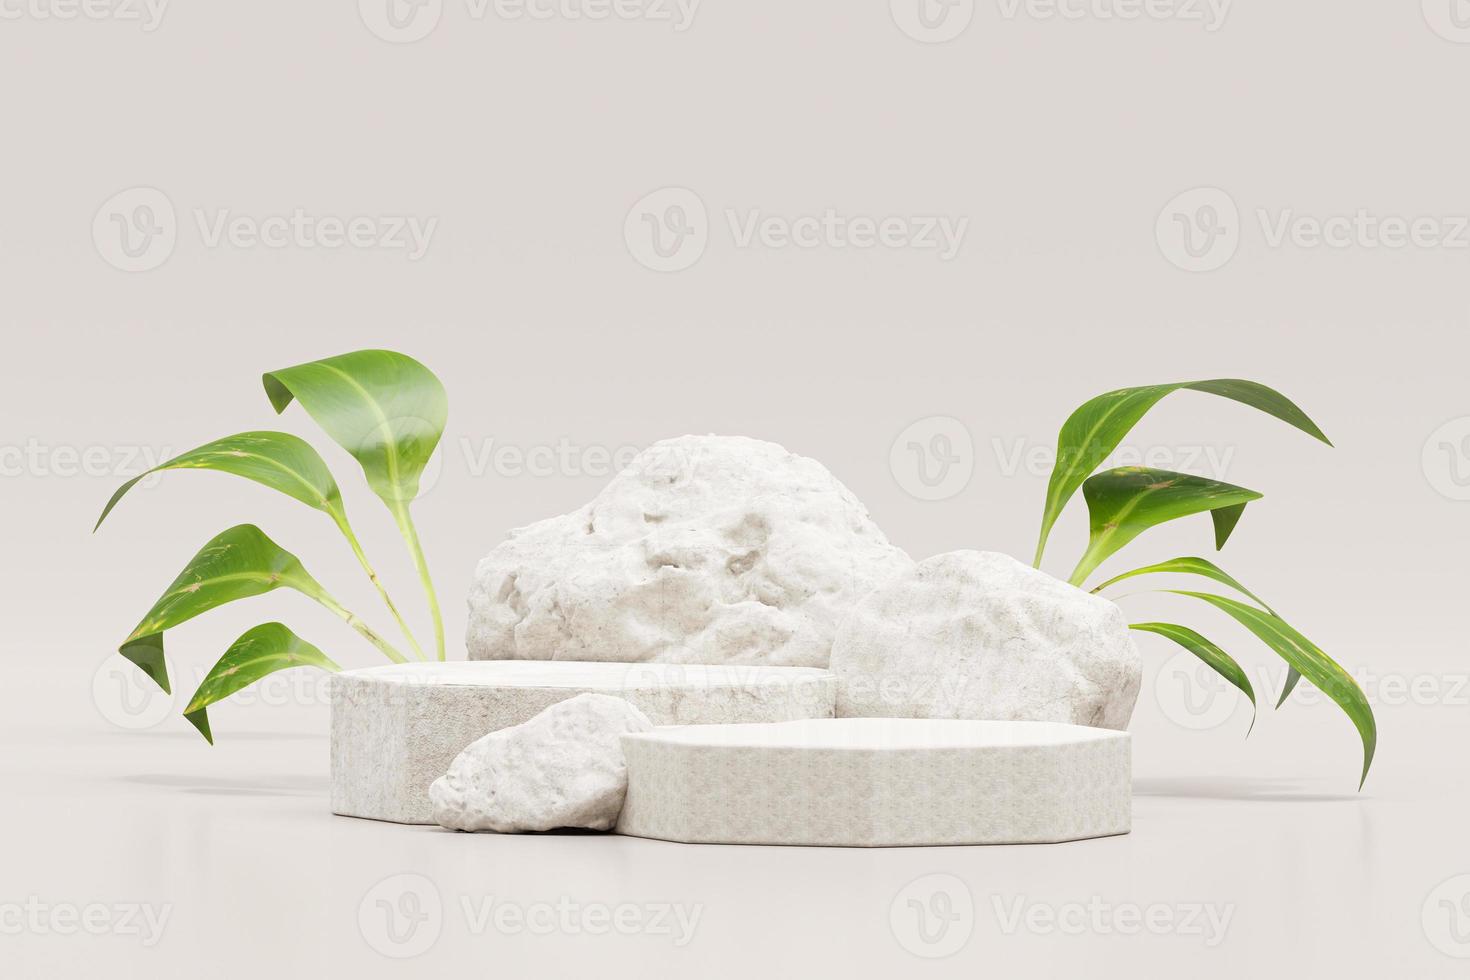 Rock or Stone podium with plant nature pedestal stage product display background 3D illustration empty display showroom presentation for product placement photo